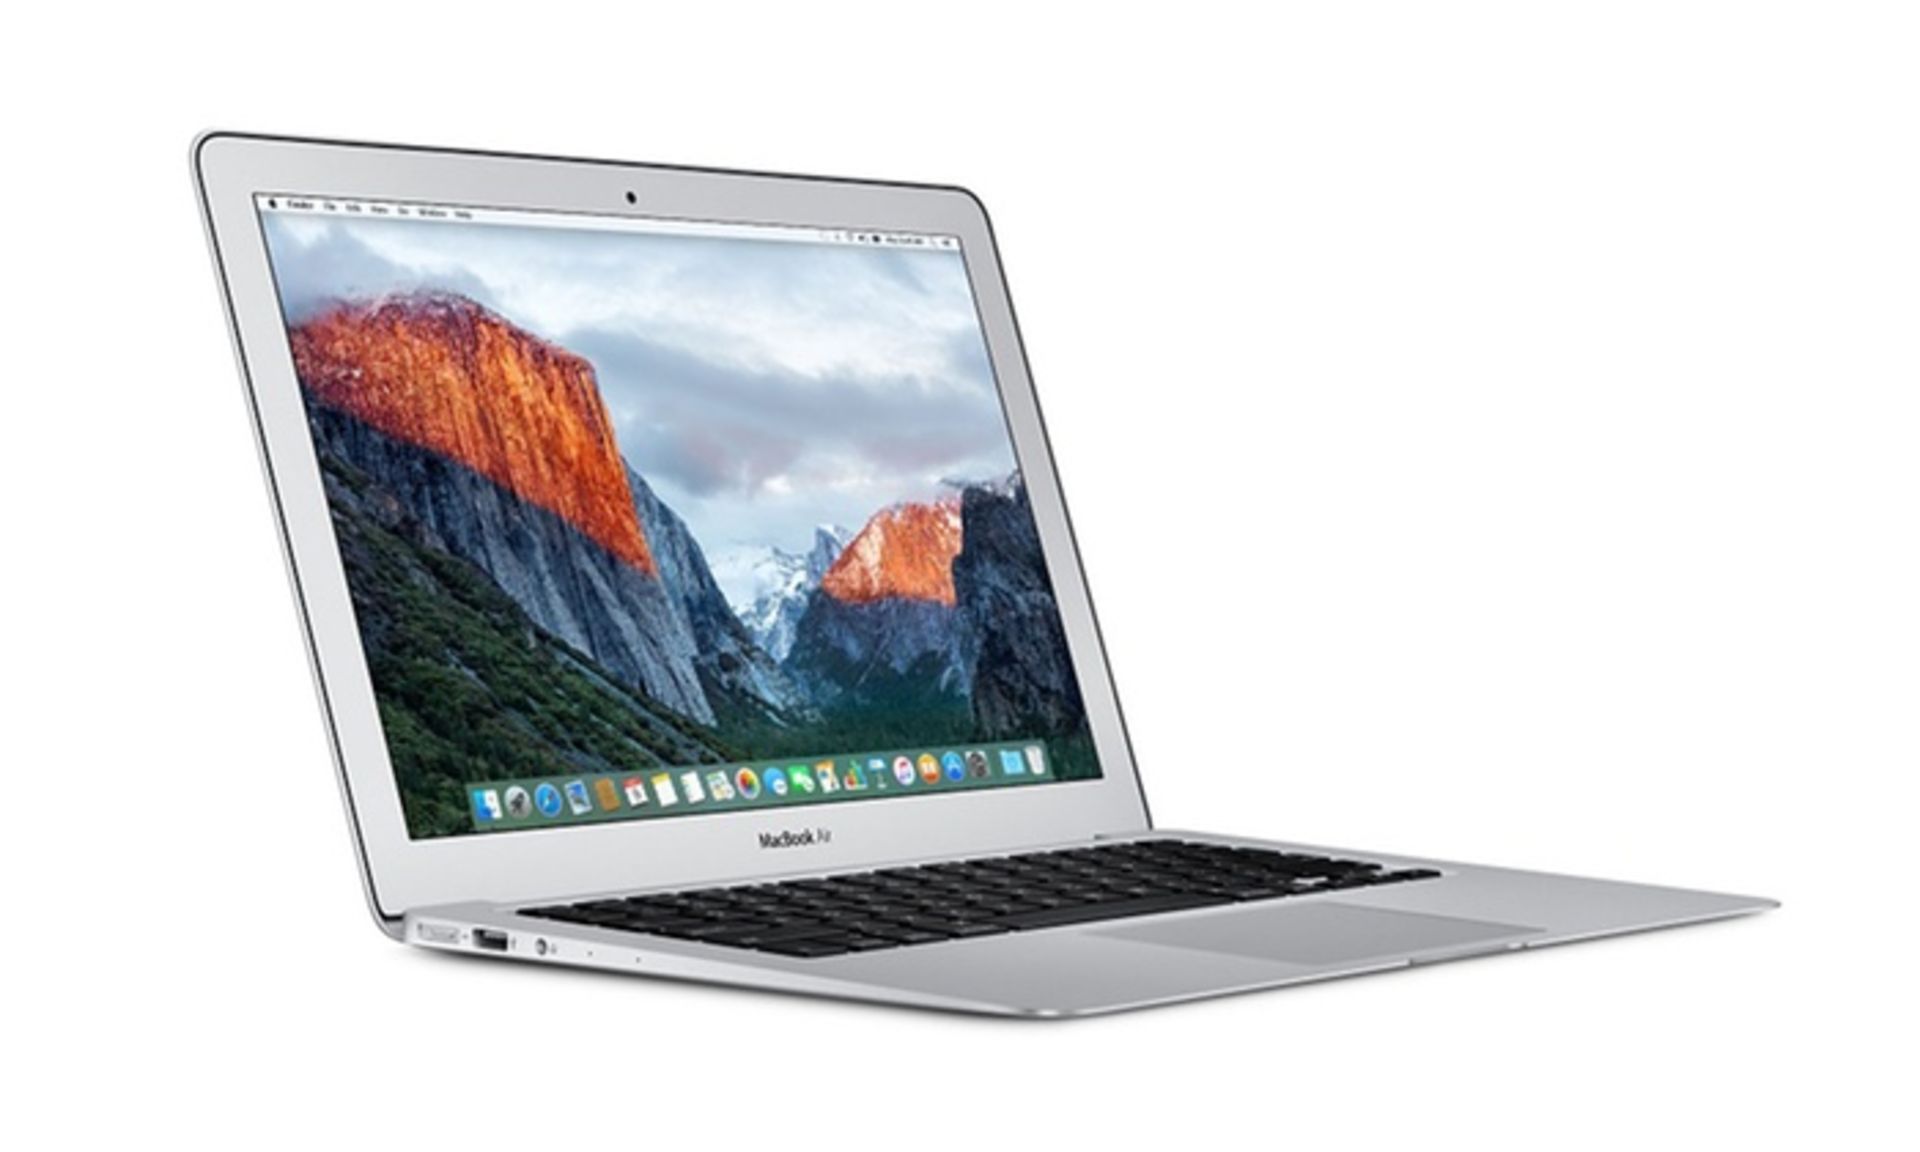 V Brand New Apple MacBook Air A1466 13.3" - Core i5 - 8GB - 128GB SSD - Image 2 of 3